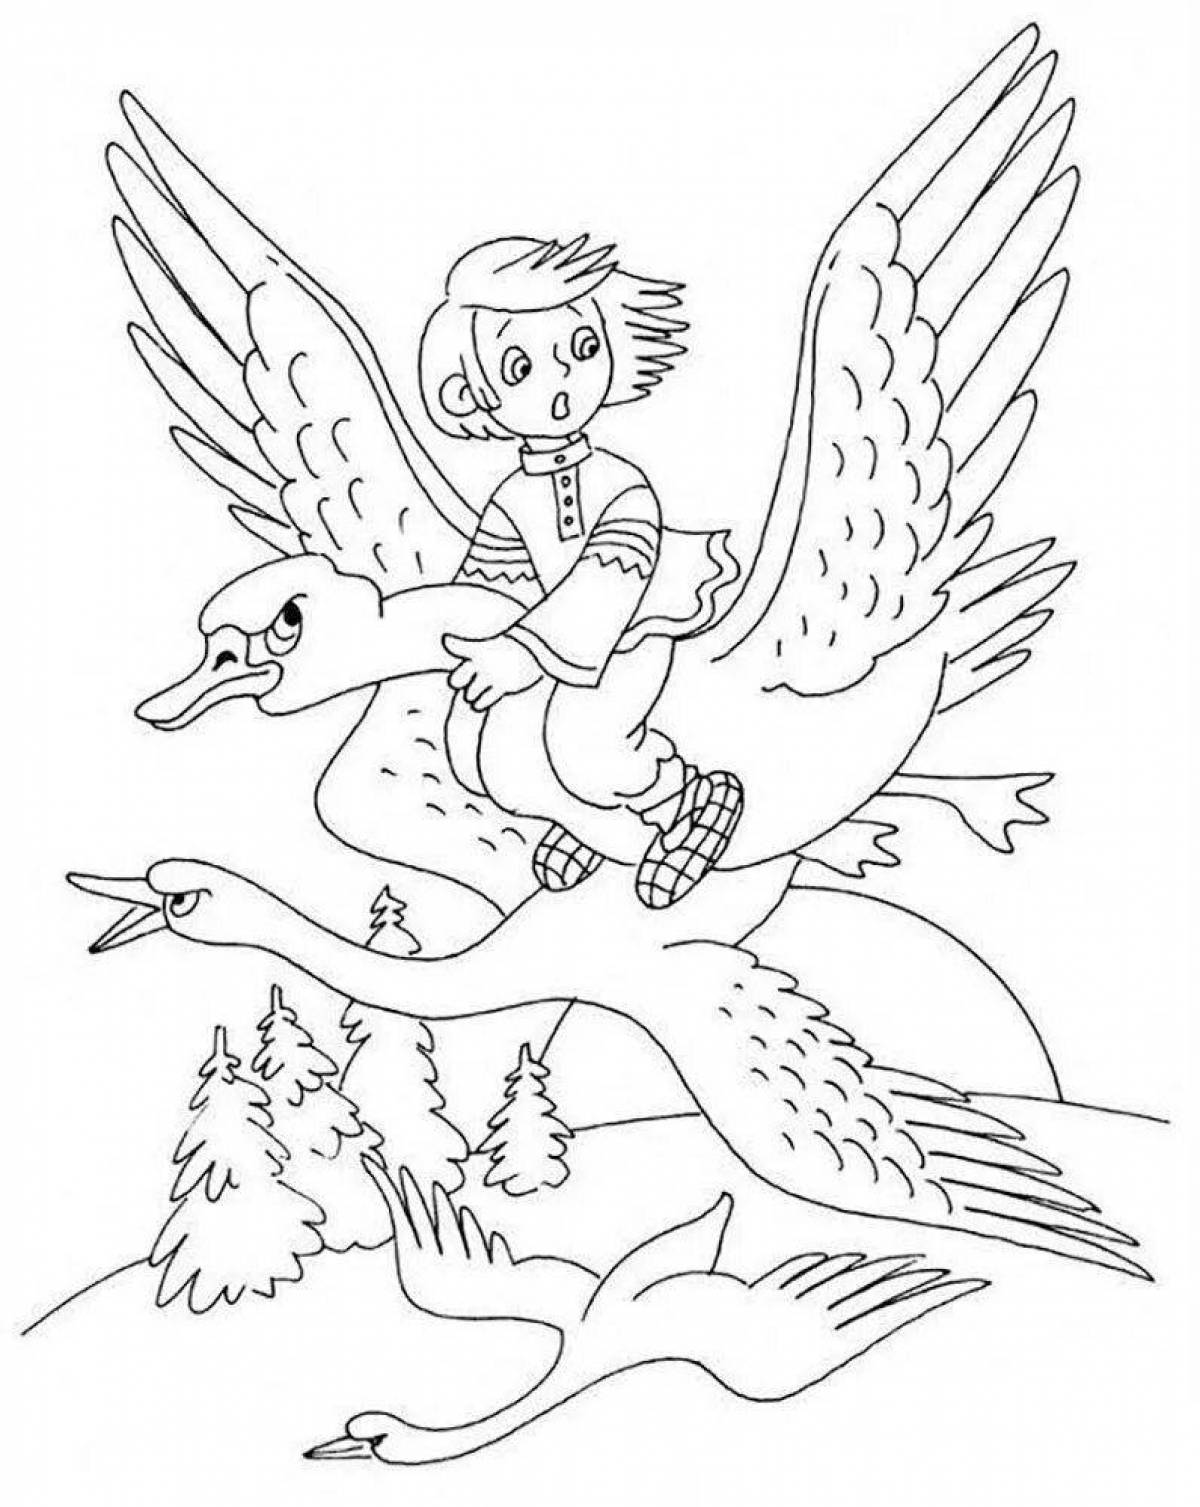 Gorgeous swan geese coloring pages for kids